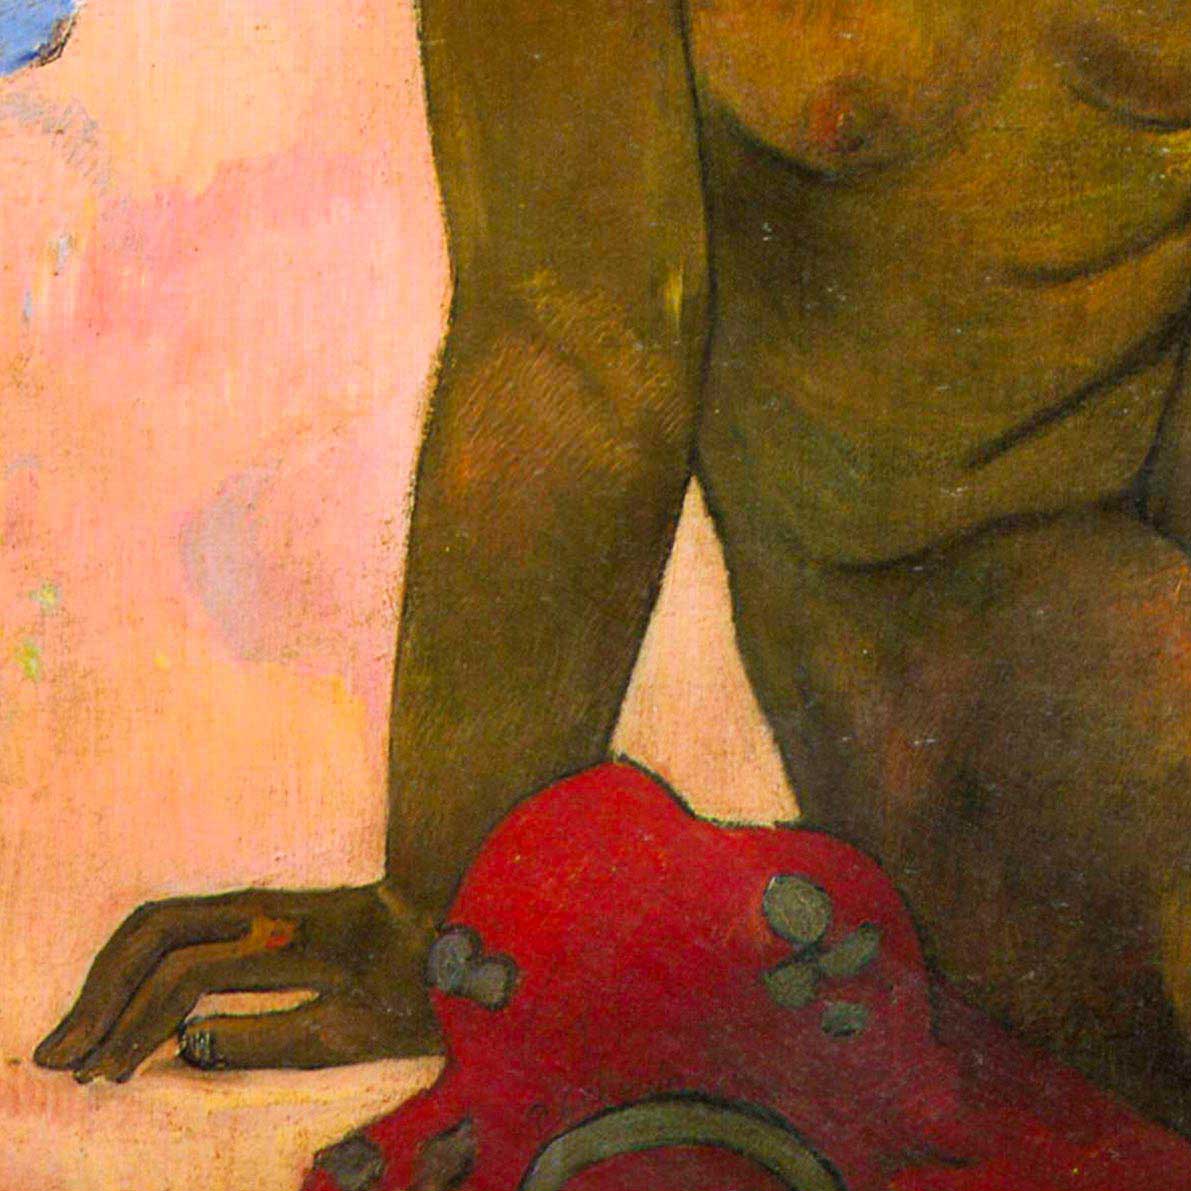 What! Are You Jealous? by Paul Gauguin